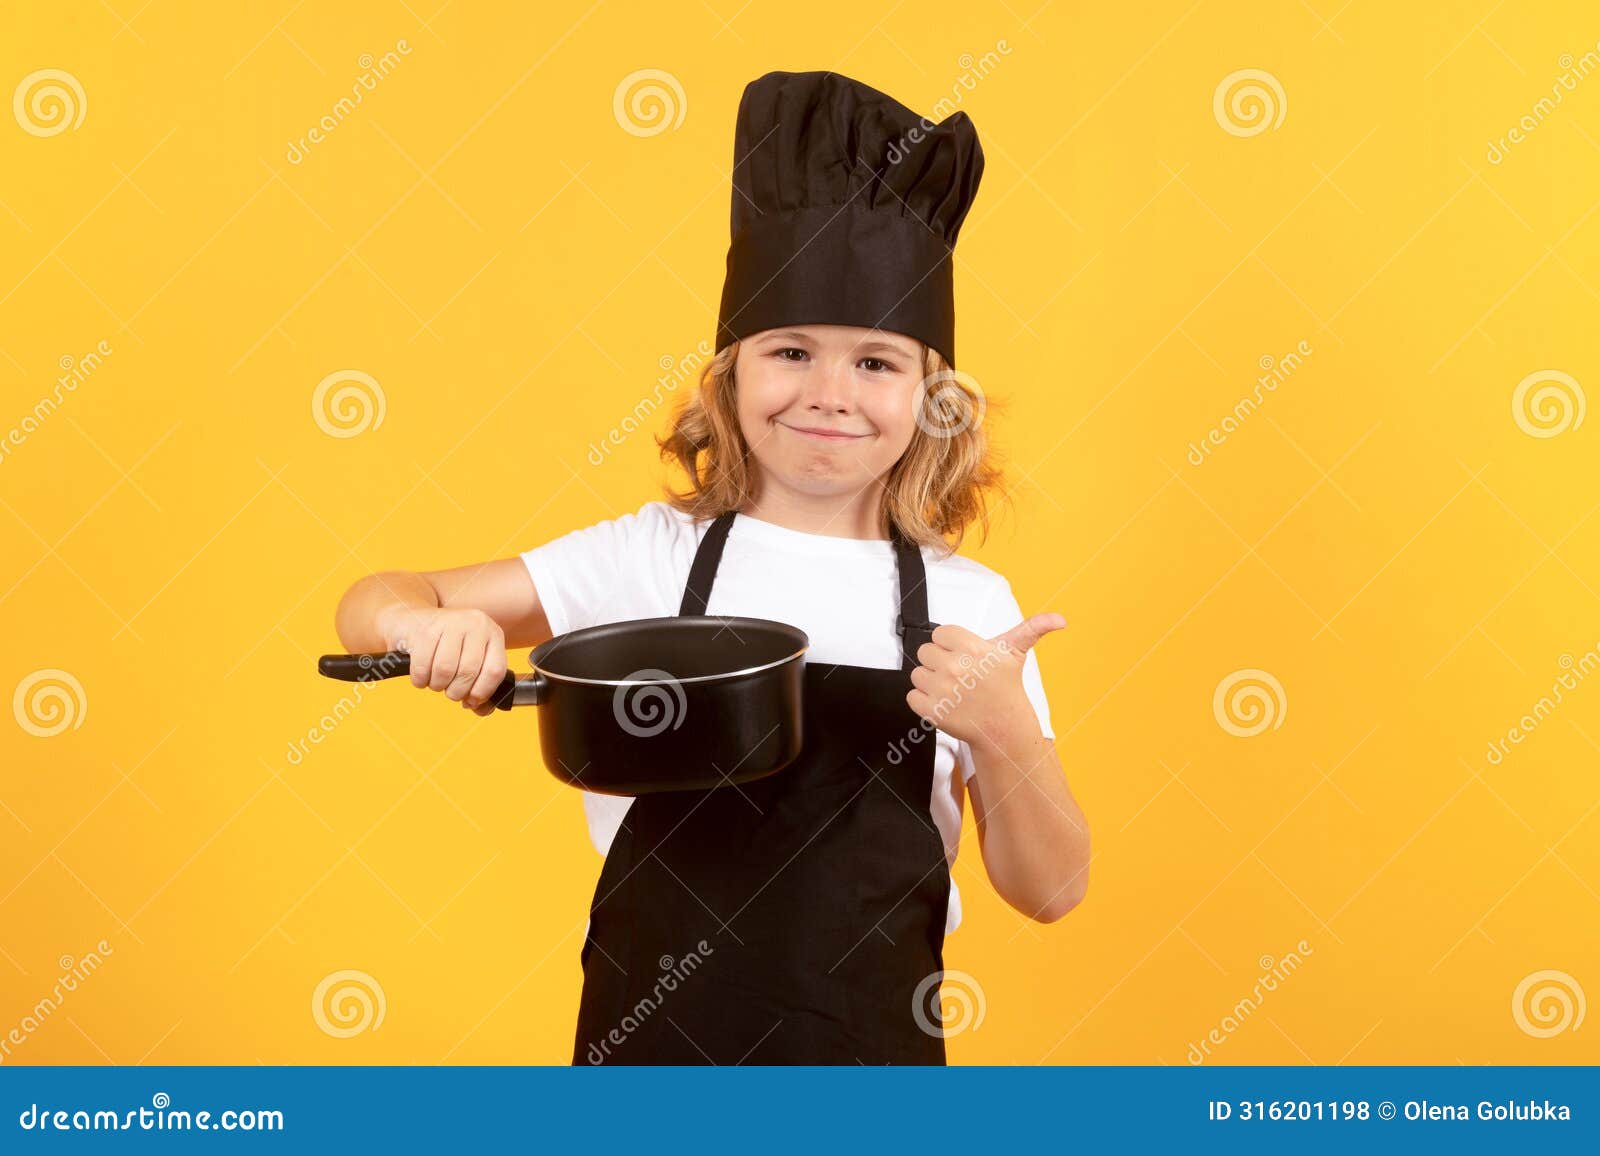 funny kid chef cook with kitchen pot stockpot. kid in cooker uniform and chef hat preparing food on studio color